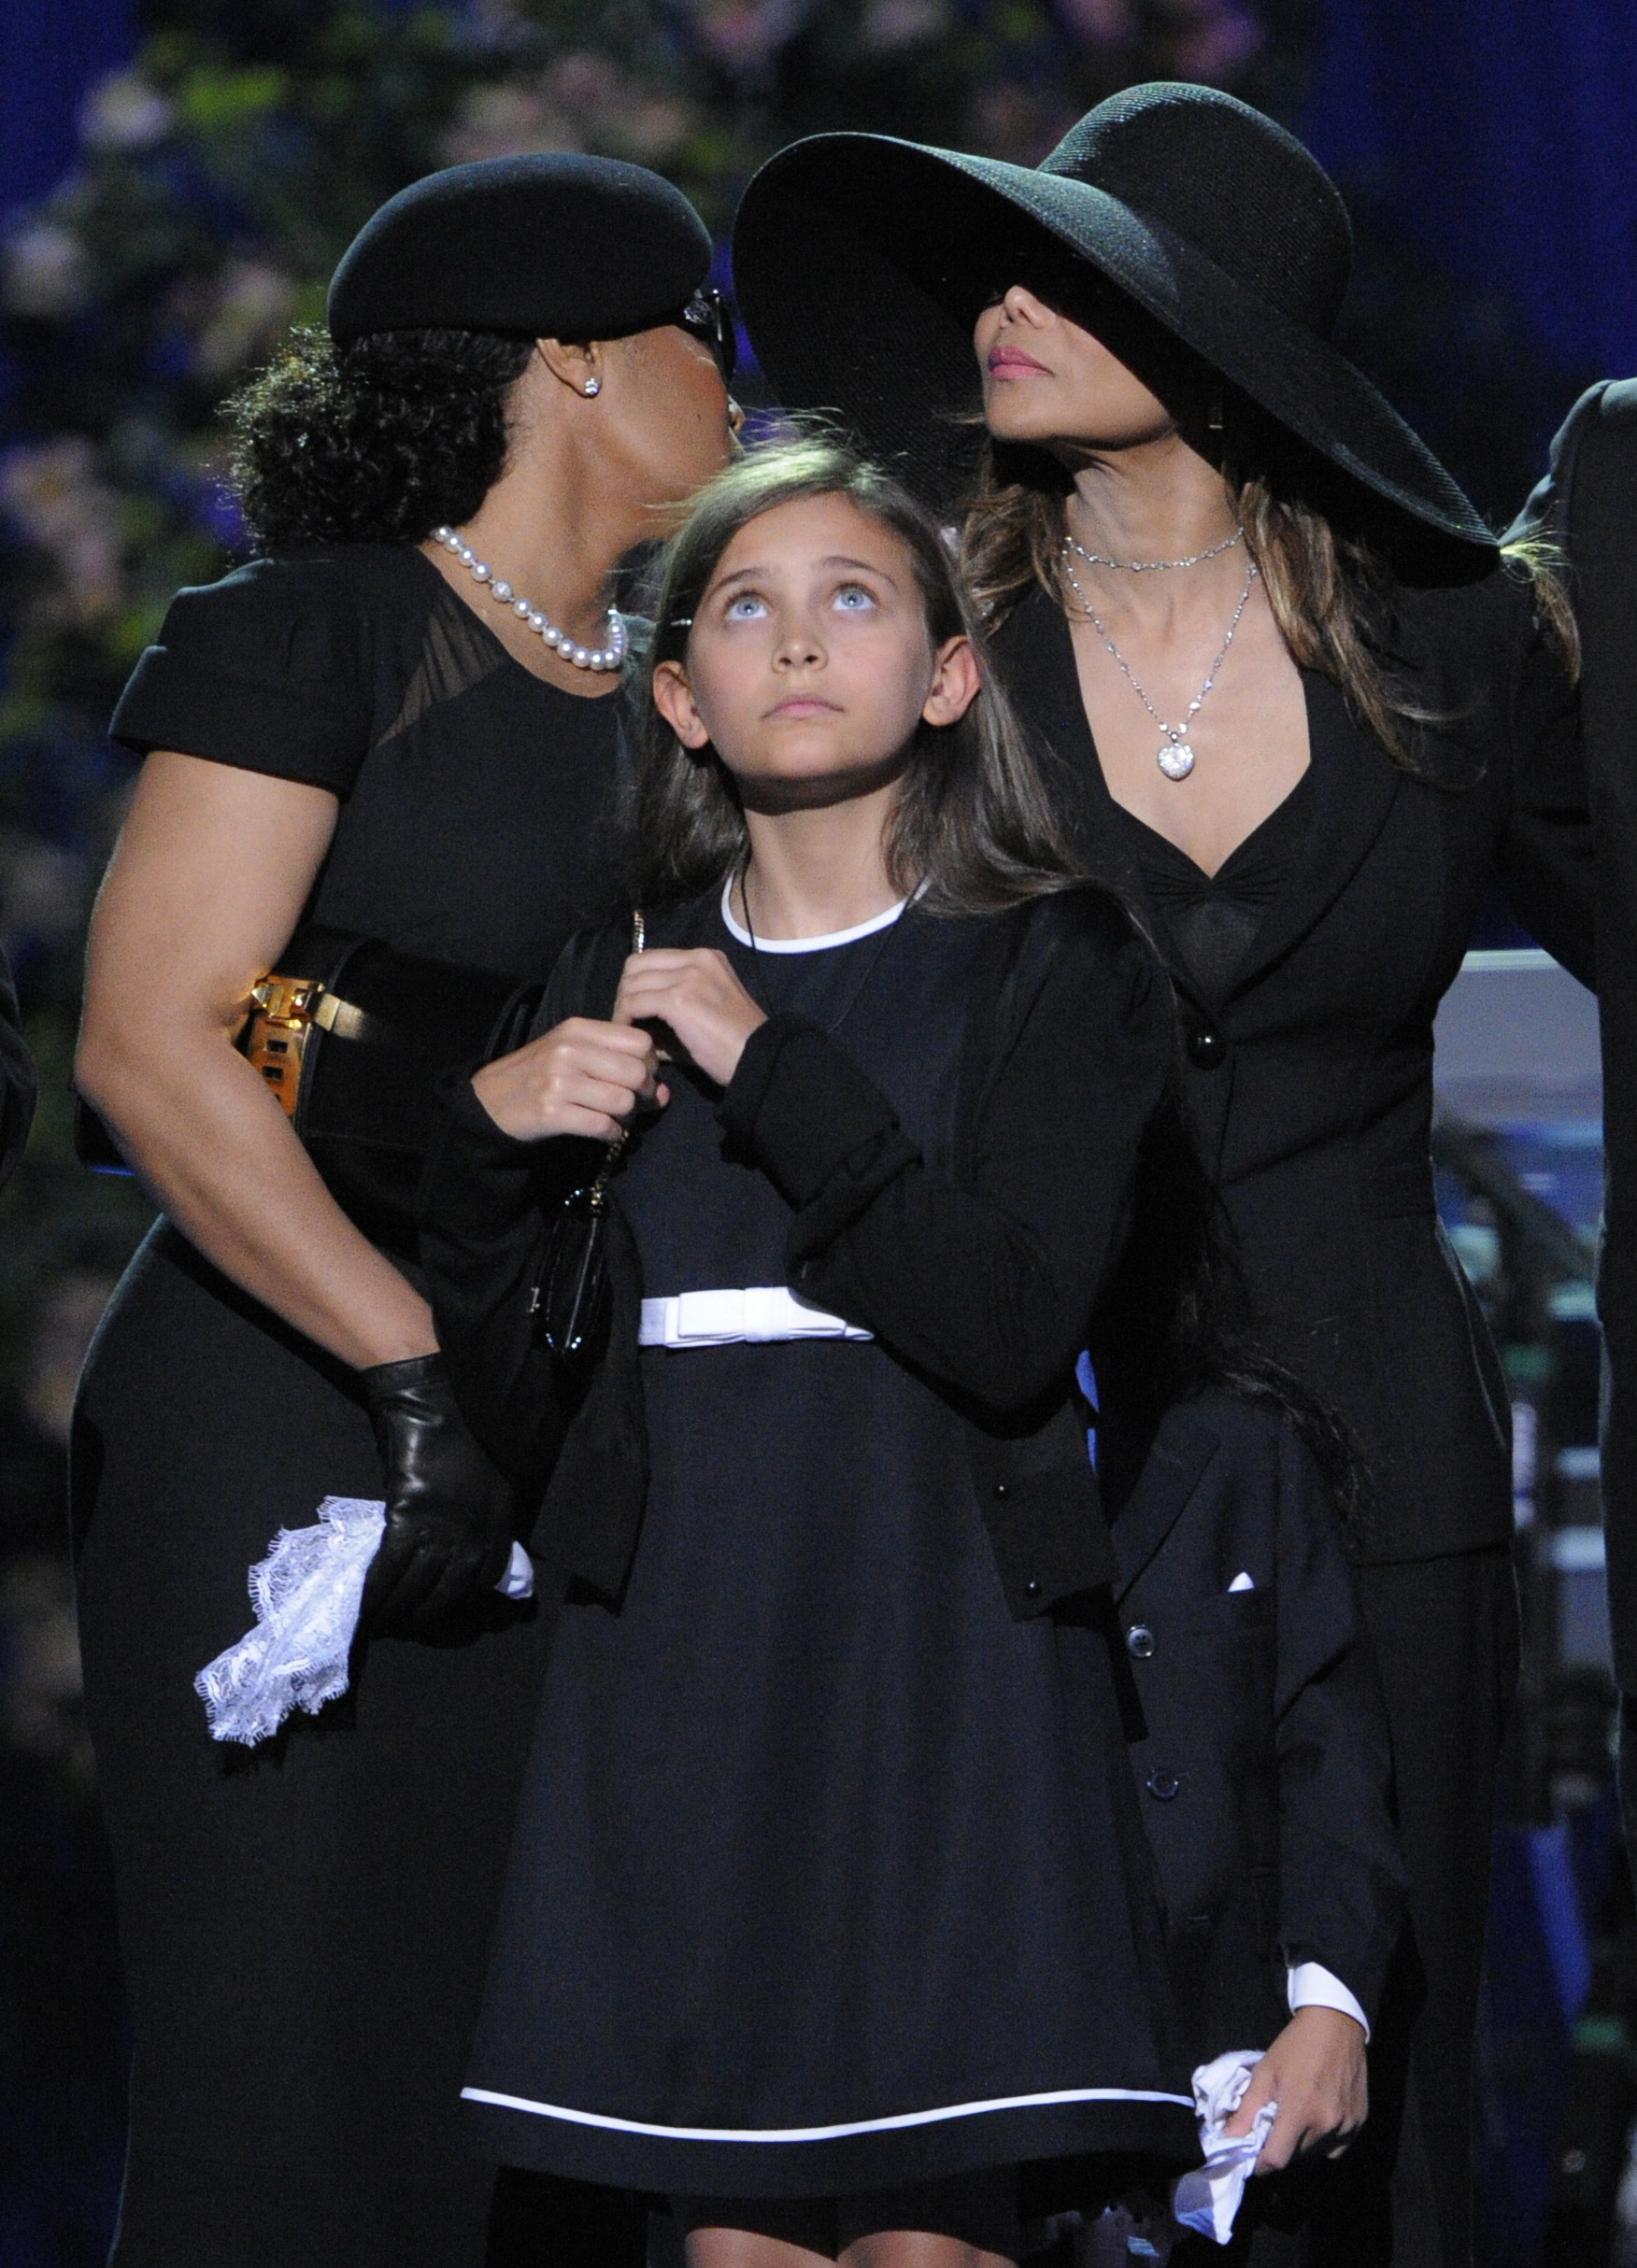 Paris Jackson and her aunt La Toya Jackson at the Michael Jackson public memorial service held in Los Angeles, California on July 7, 2009 | Source: Getty Images